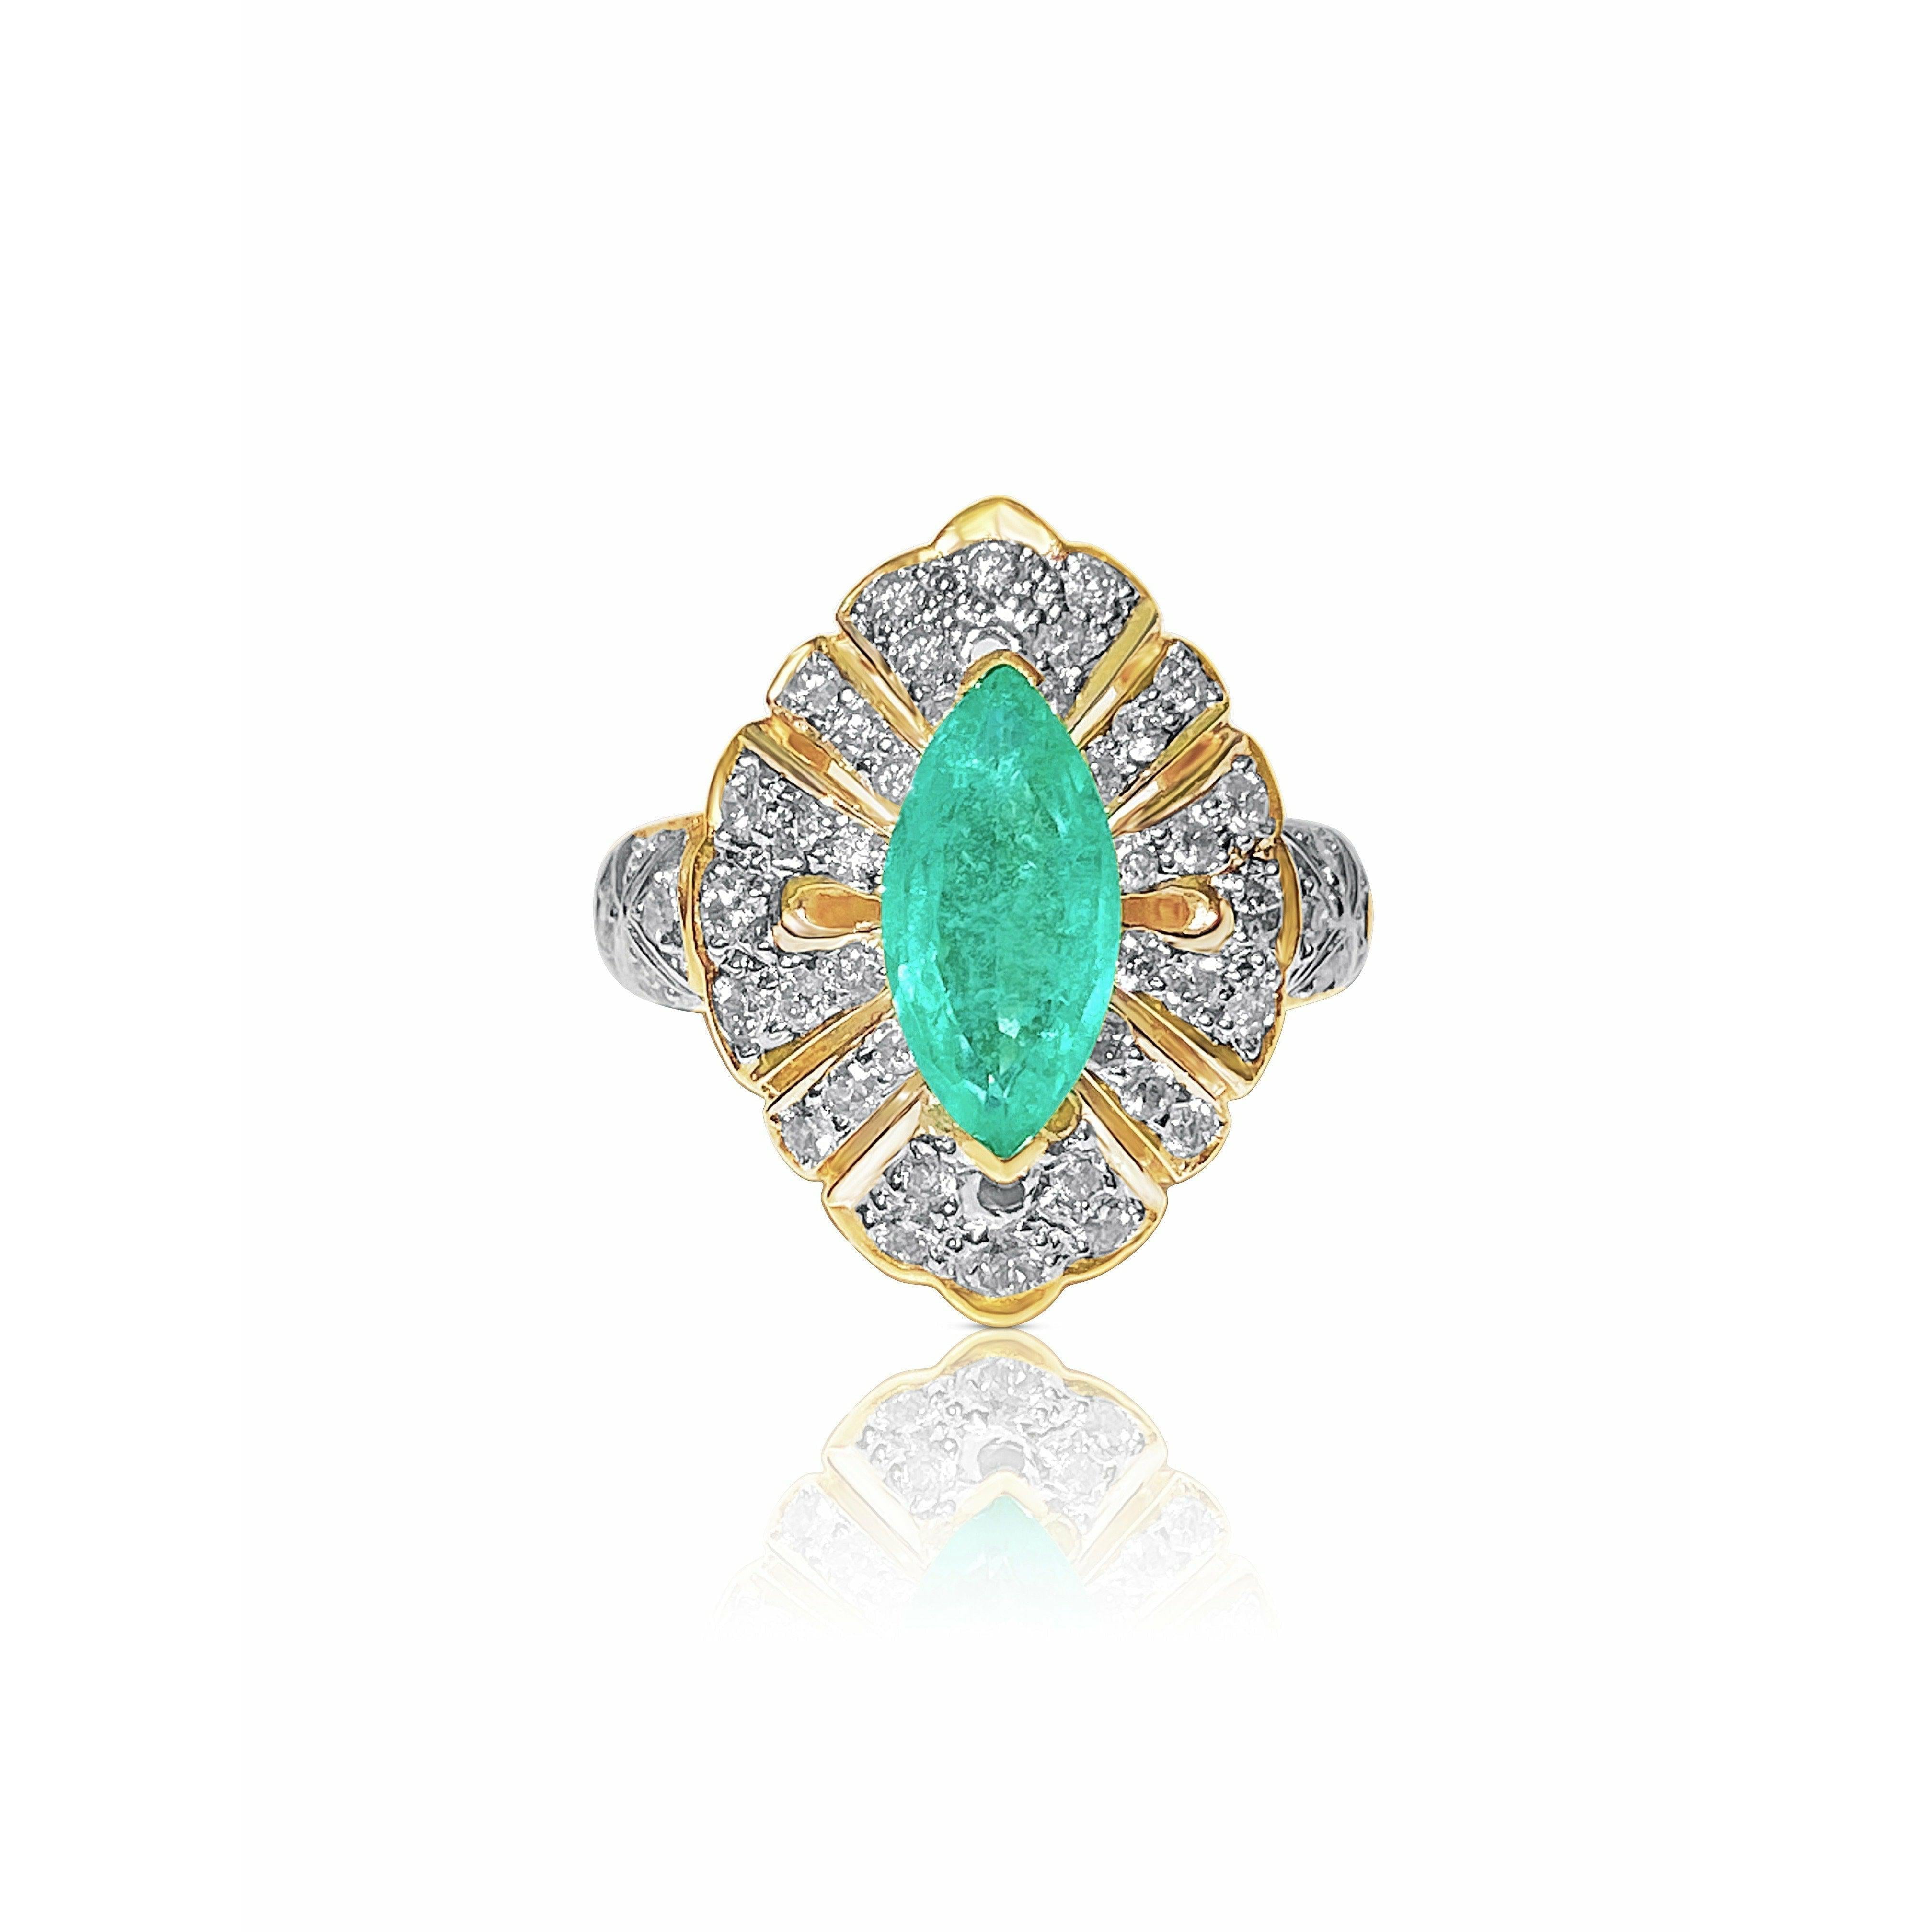 0.75 carat Marquise cut Emerald in 14k solid yellow gold Ring - ASSAY